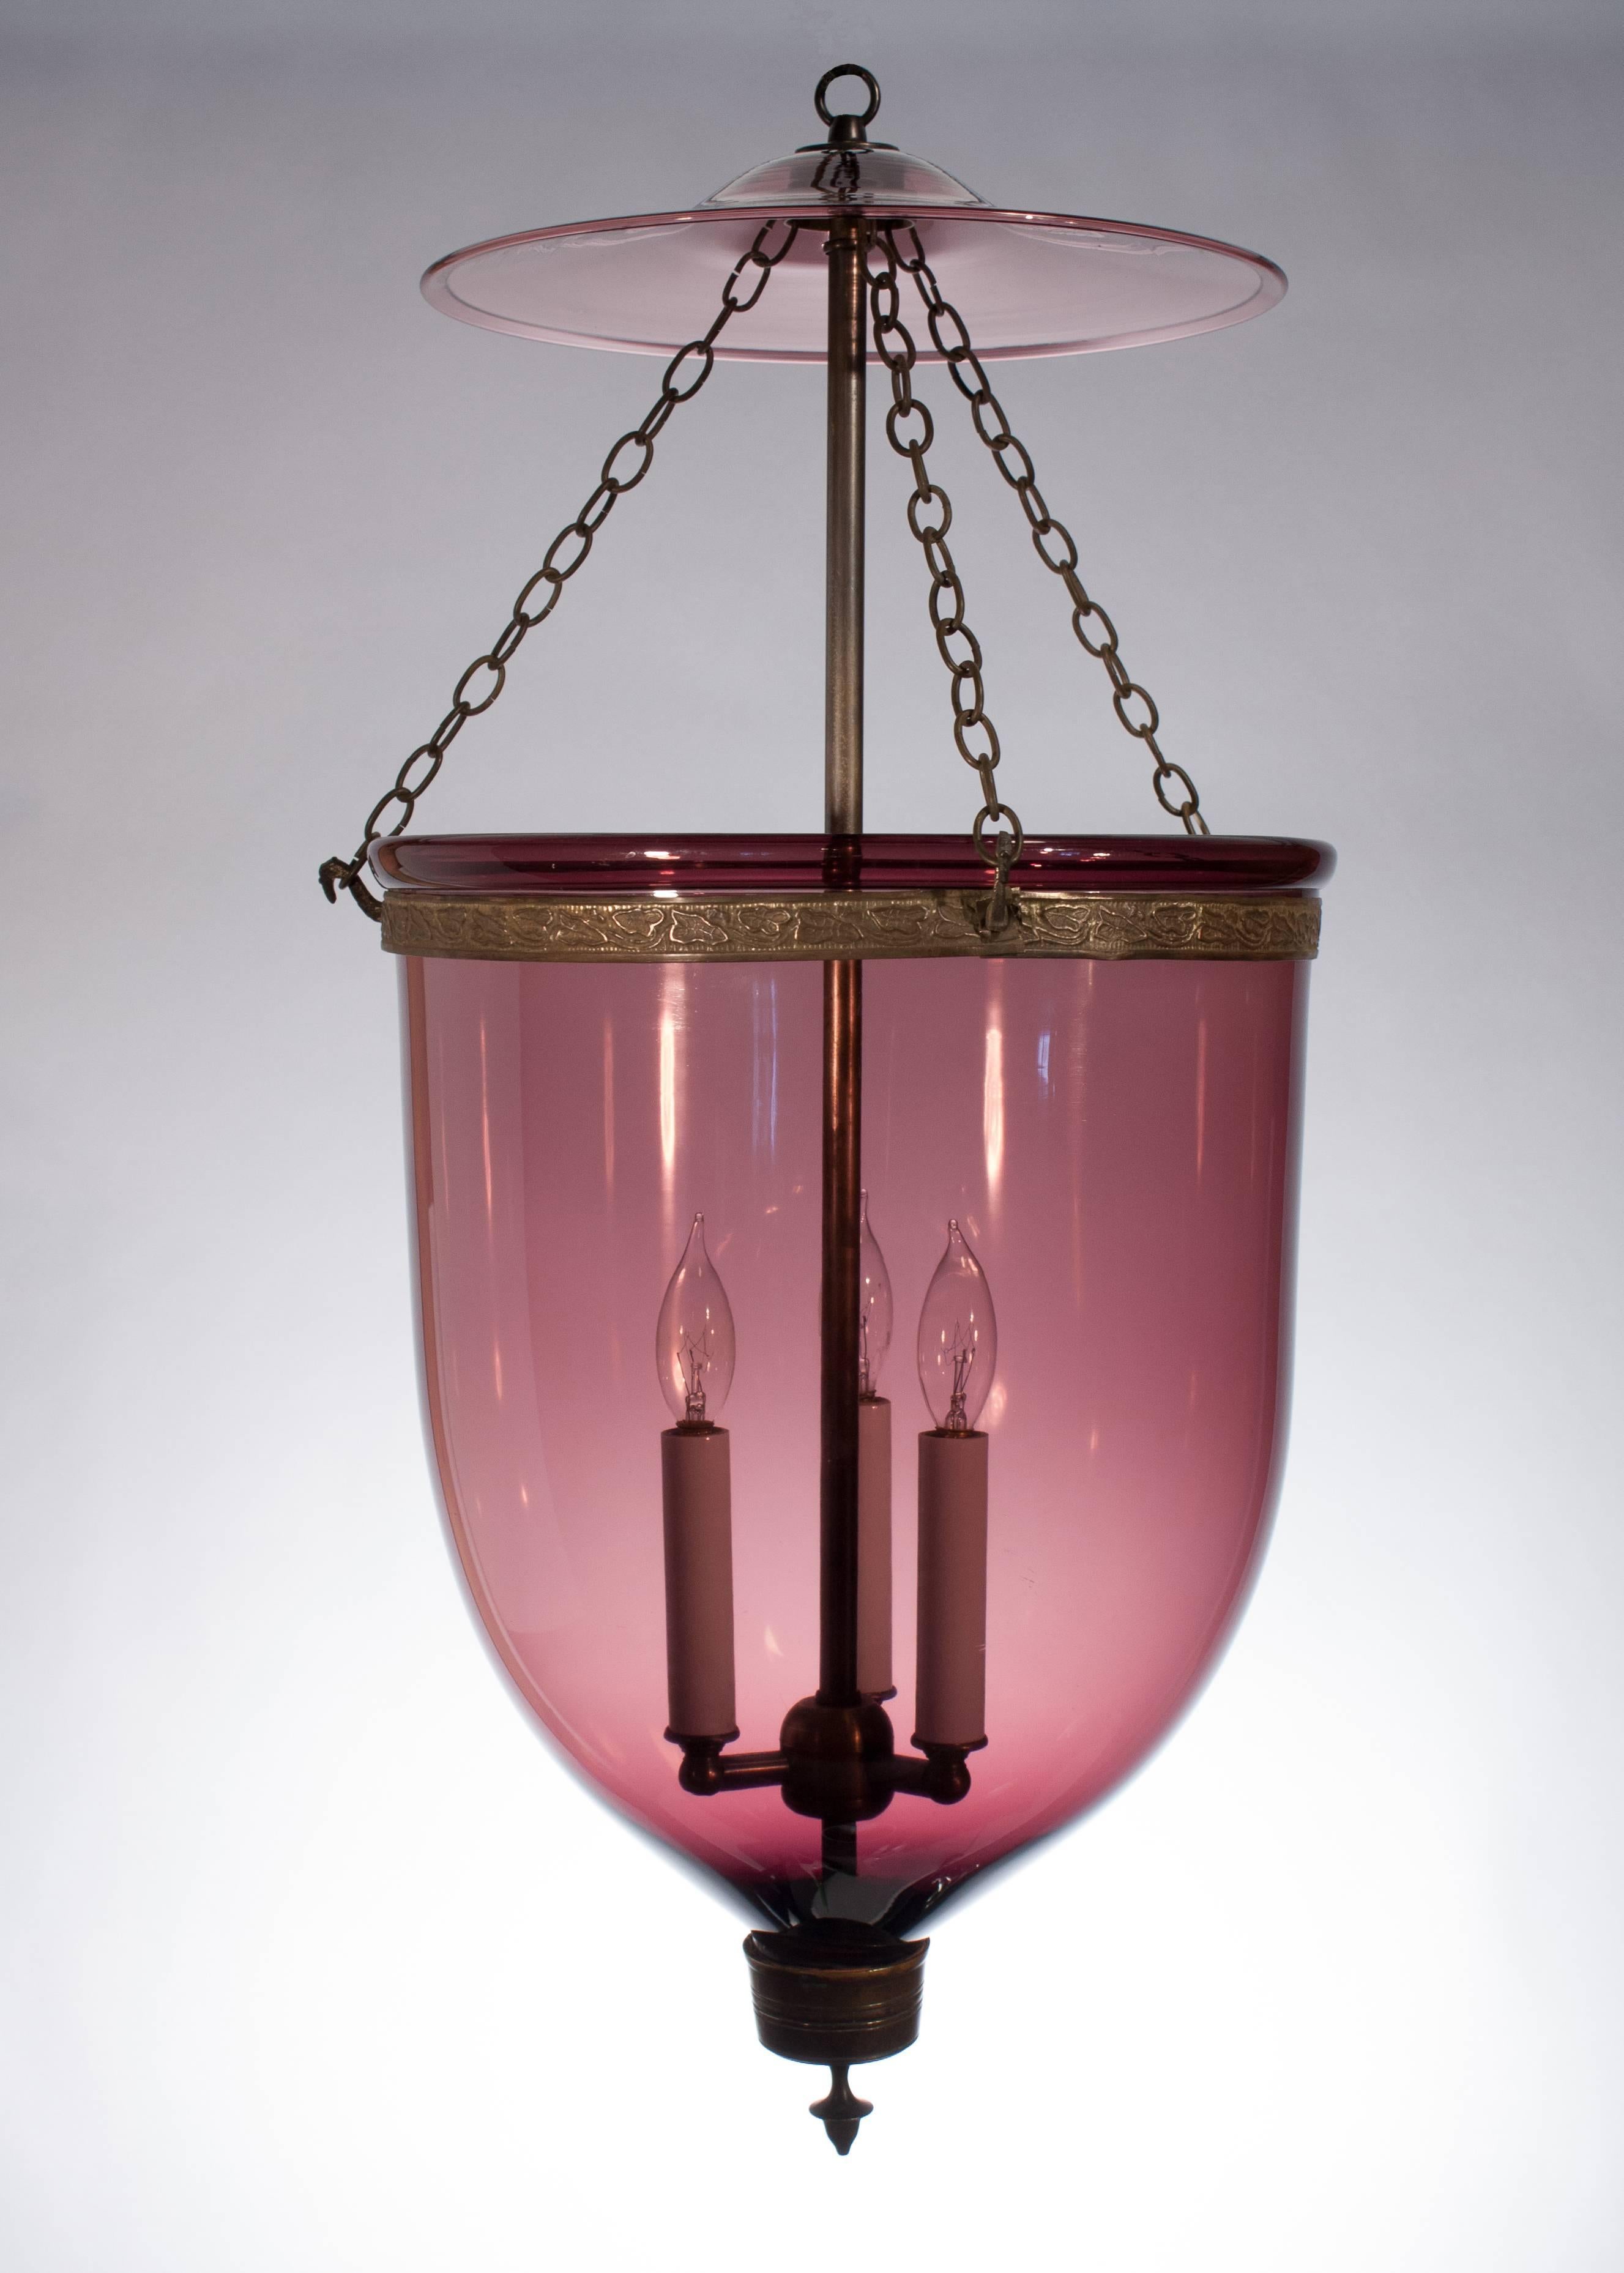 Breathtaking. Every detail of this large, rare 19th century English bell jar lantern is exceptional from the superb quality of the handblown glass to its sensuous form and from its sultry amethyst color to the way the glass funnels flawlessly into